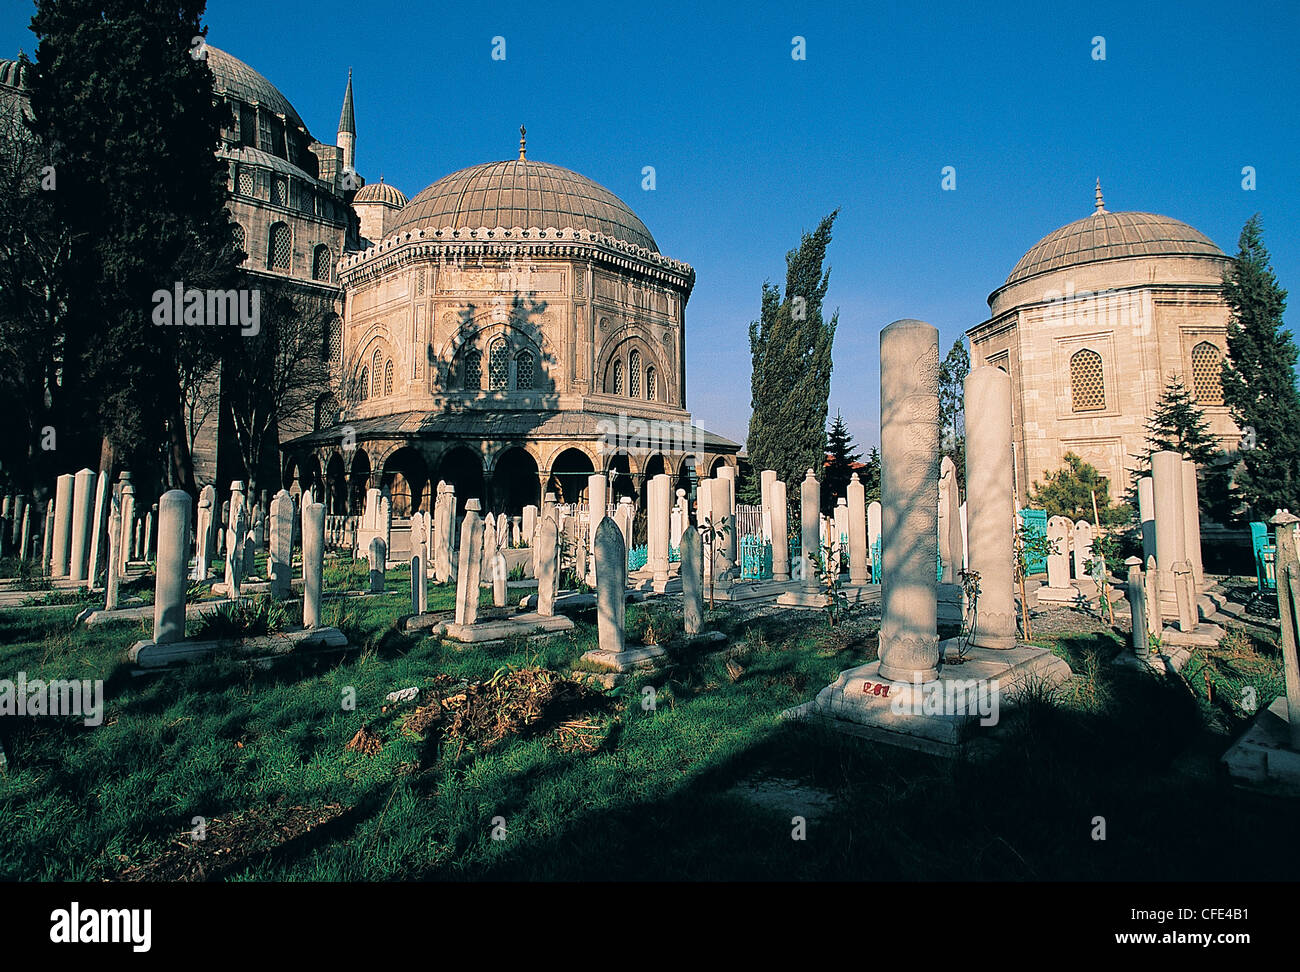 Tomb of Sultan Suleiman the Magnificent Istanbul Turkey Stock Photo